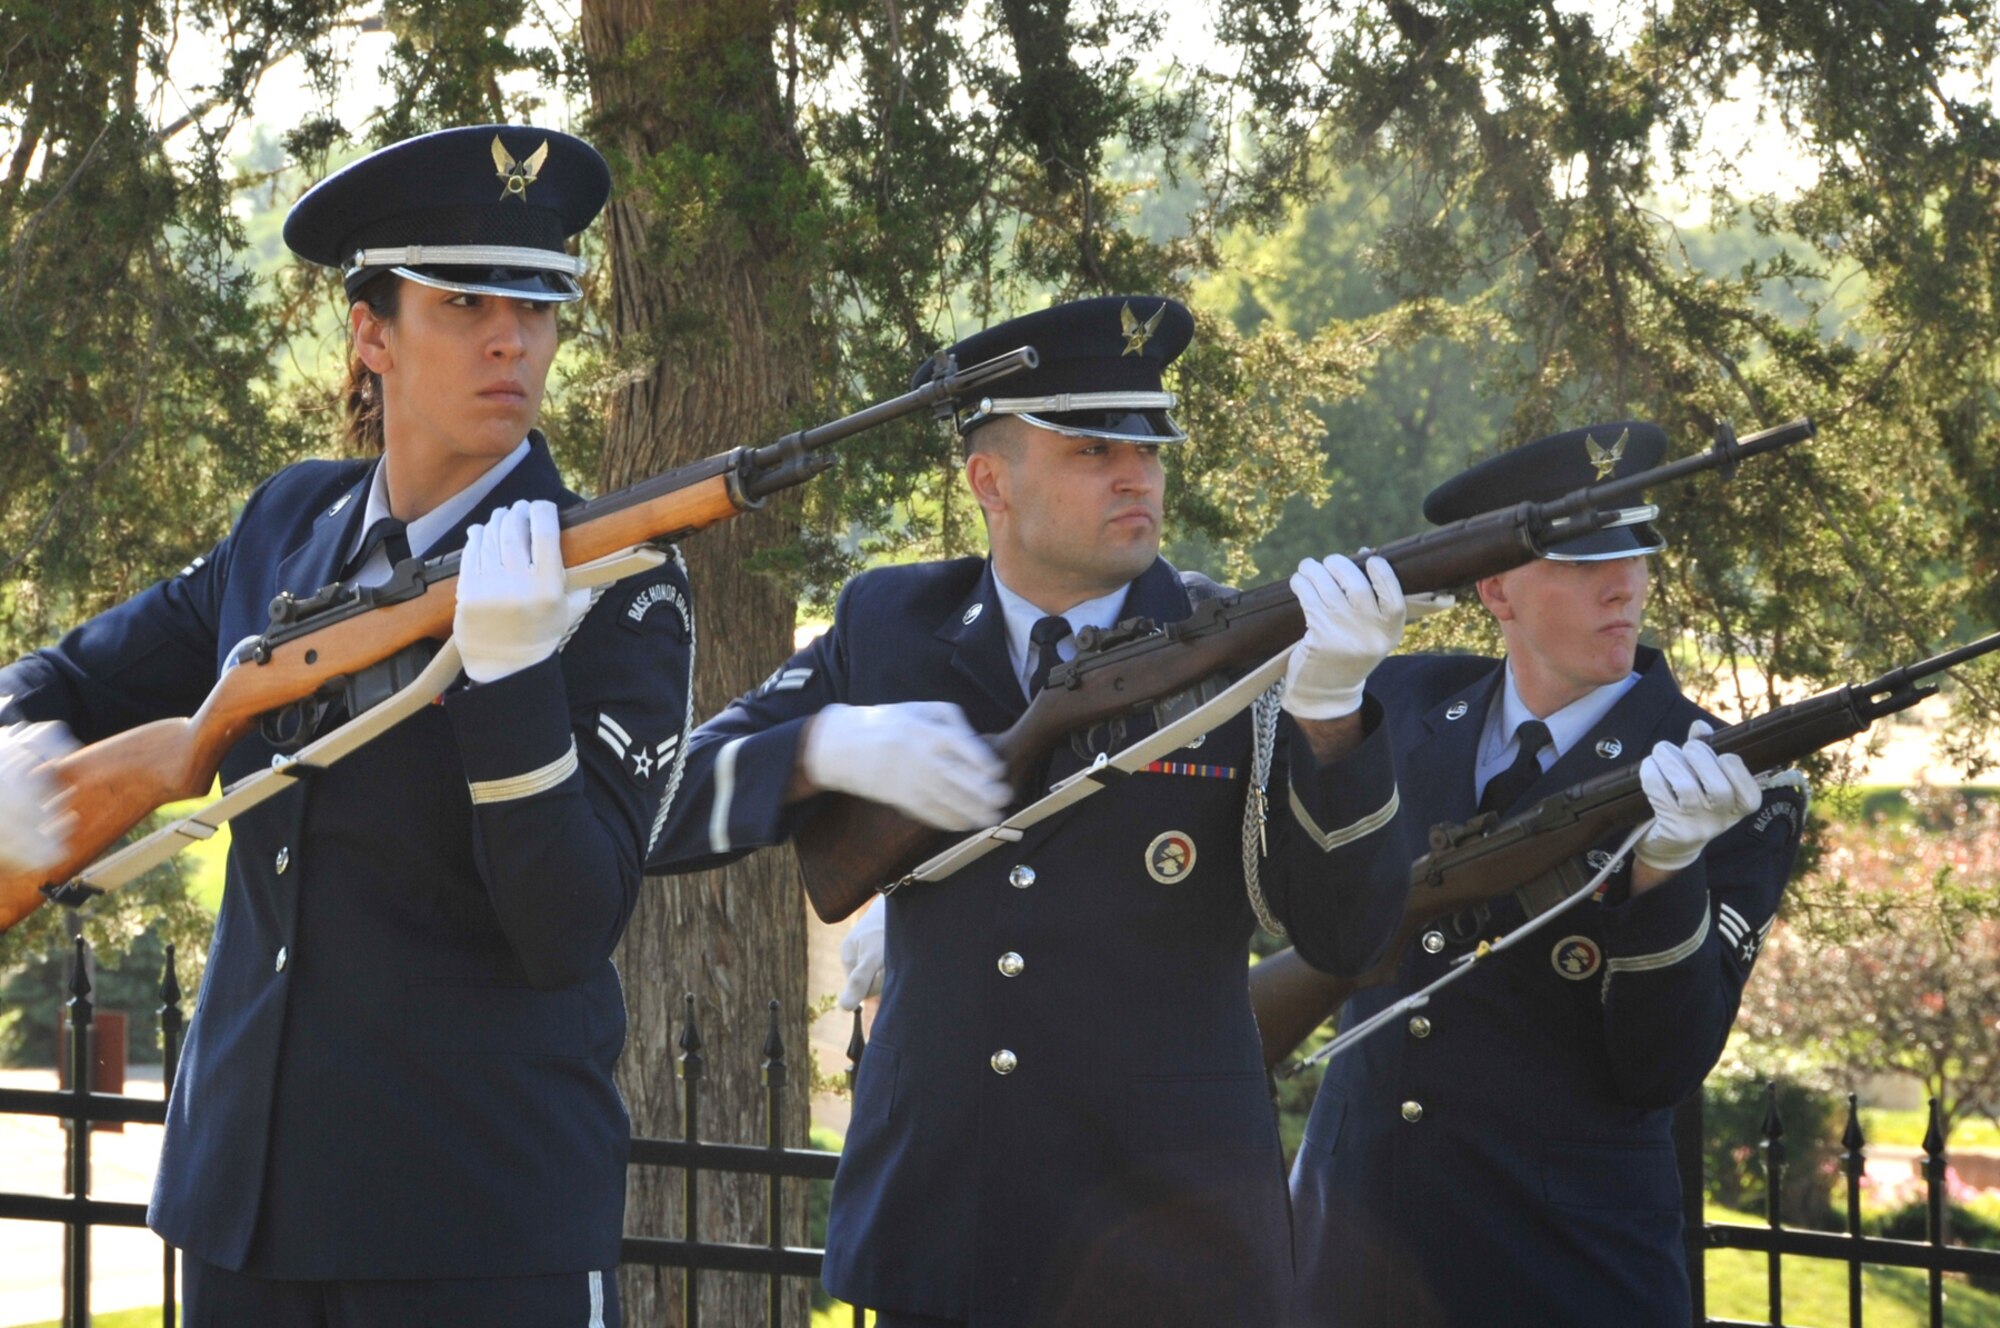 OFFUTT AIR FORCE BASE, Neb. -- Members of the Offutt Honor Guard fire off one of three volleys during Offutt's Memorial Day ceremony at the base cemetery here May 31. More than 100 people attended the annual service. U.S. Air Force Photo by D.P. Heard